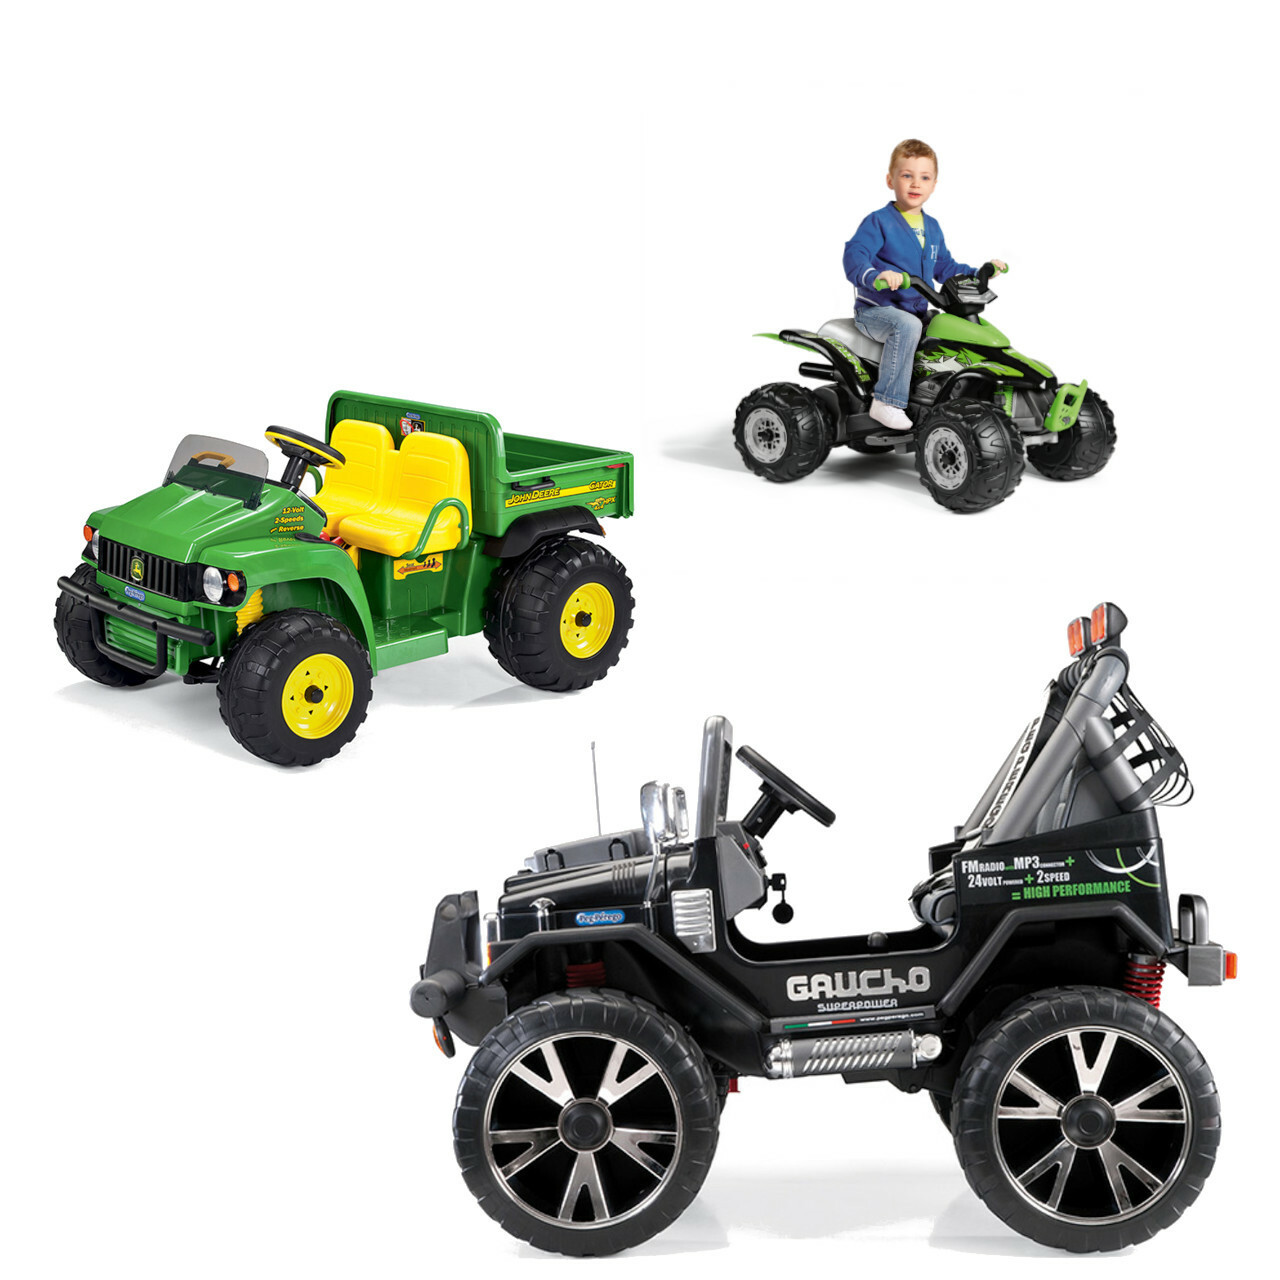 Buy Peg Perego Spare Replacement Parts by Ride-on Vehicle